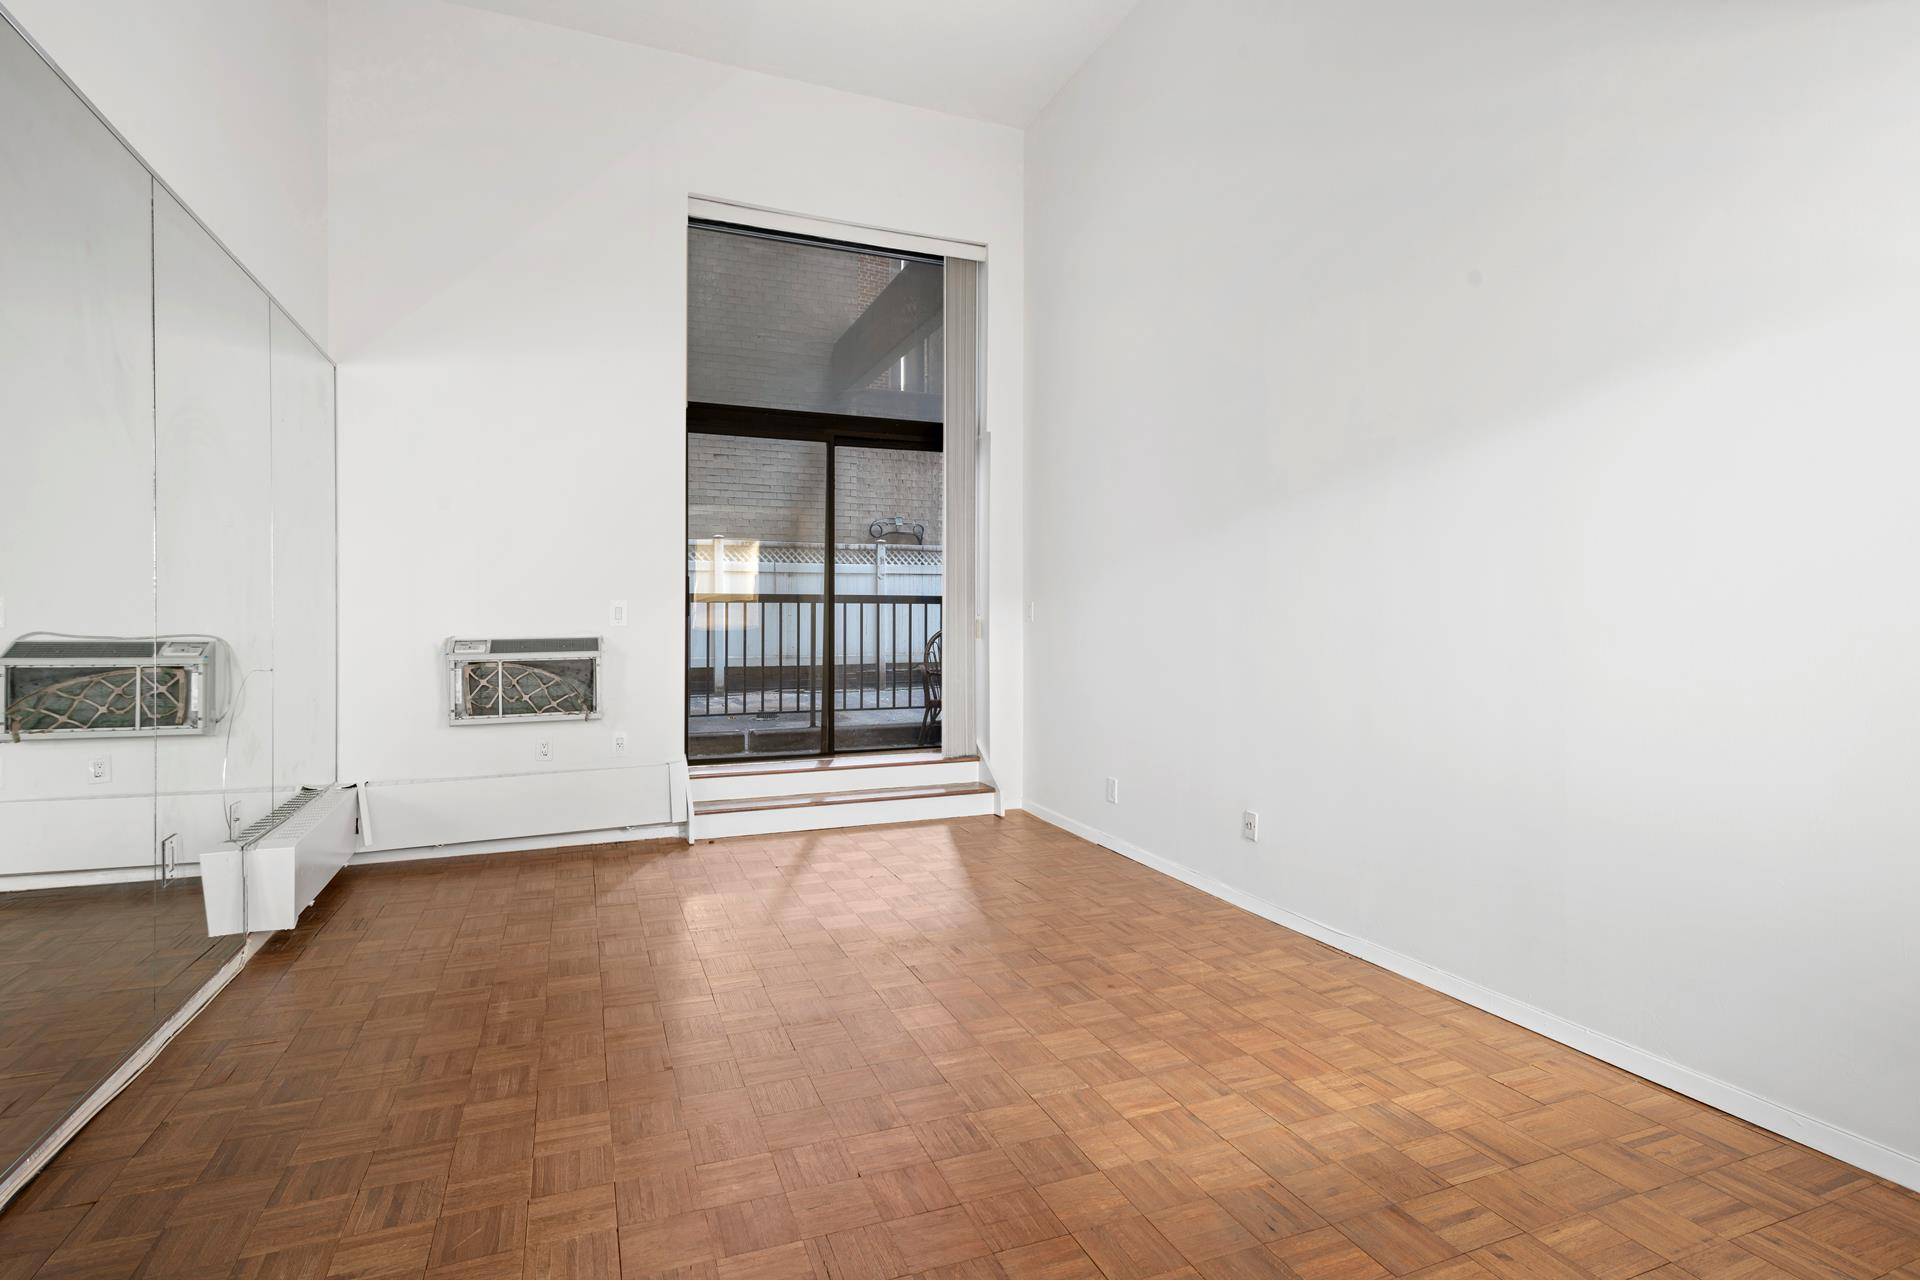 Spectacular over sized open layout versatile lofted studio with soaring 14 foot high ceilings.